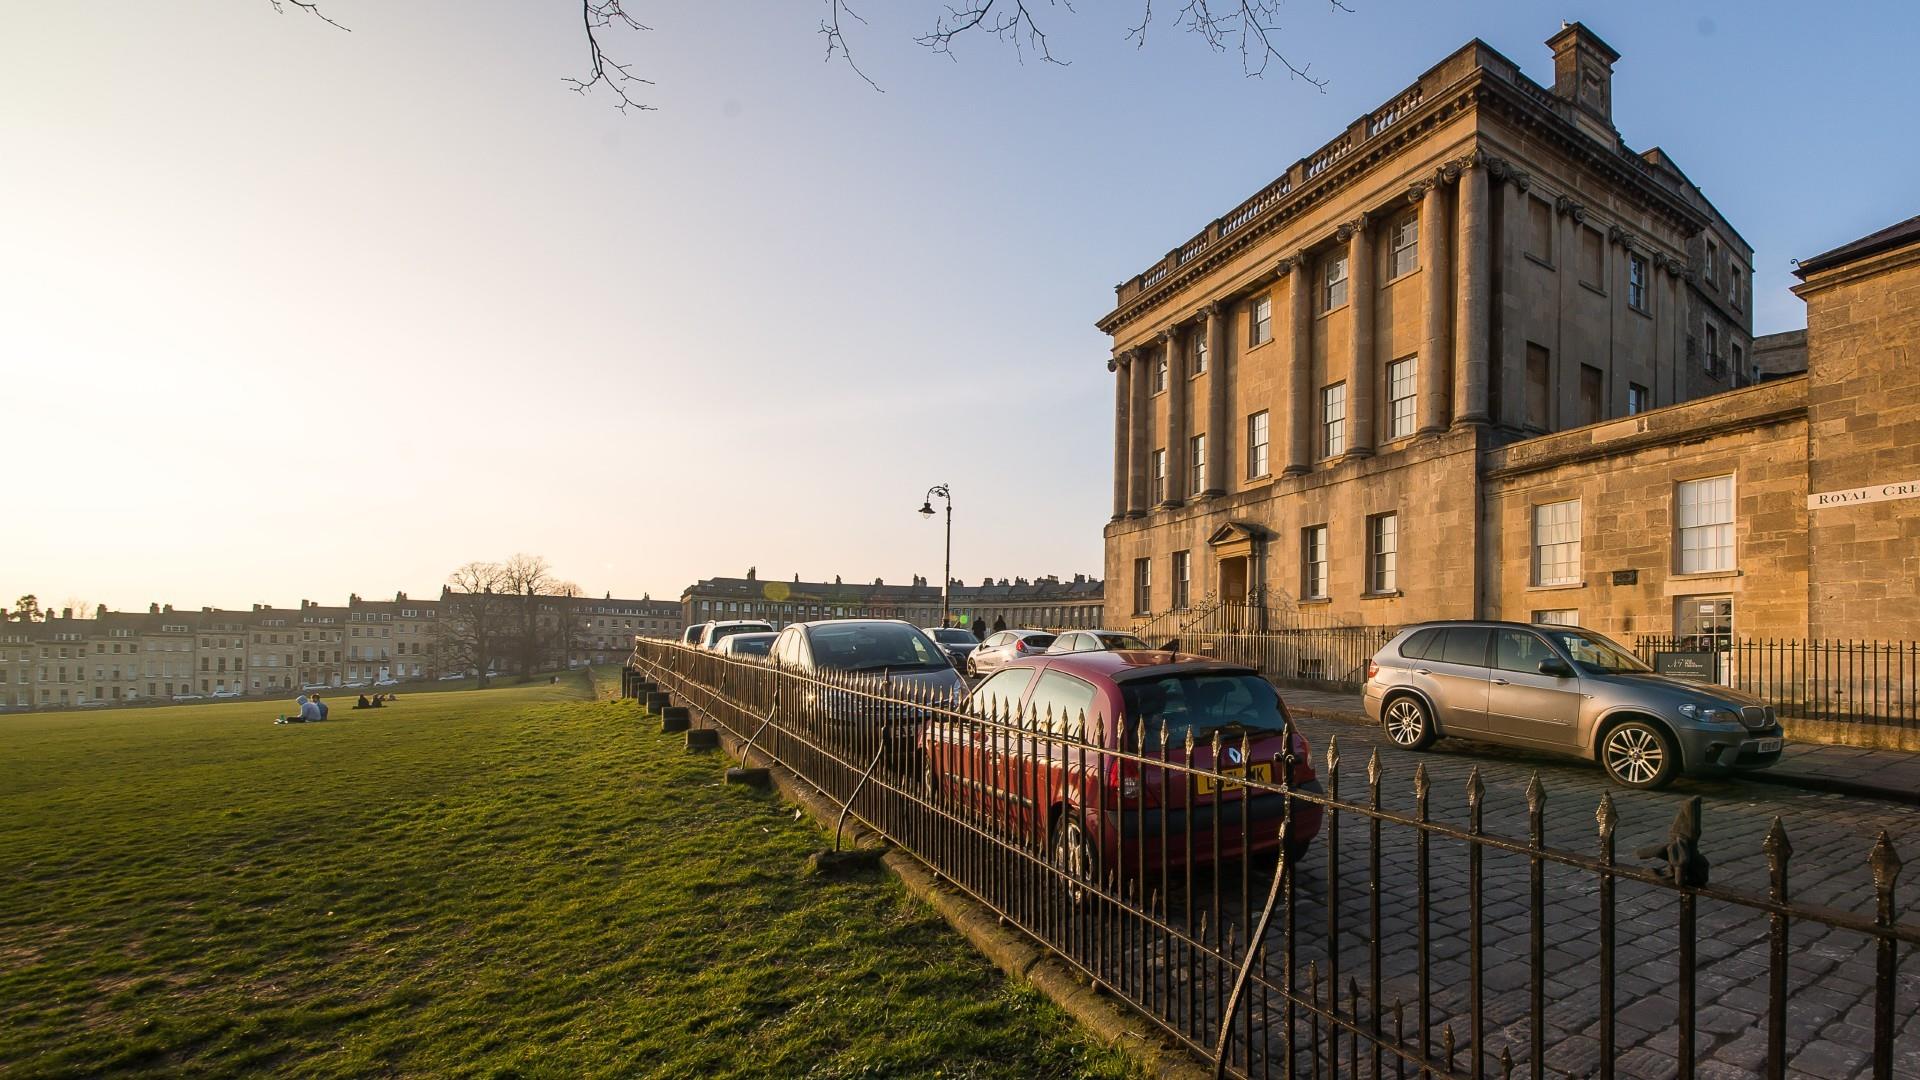 The view of Royal Crescent taken from the corner of the street